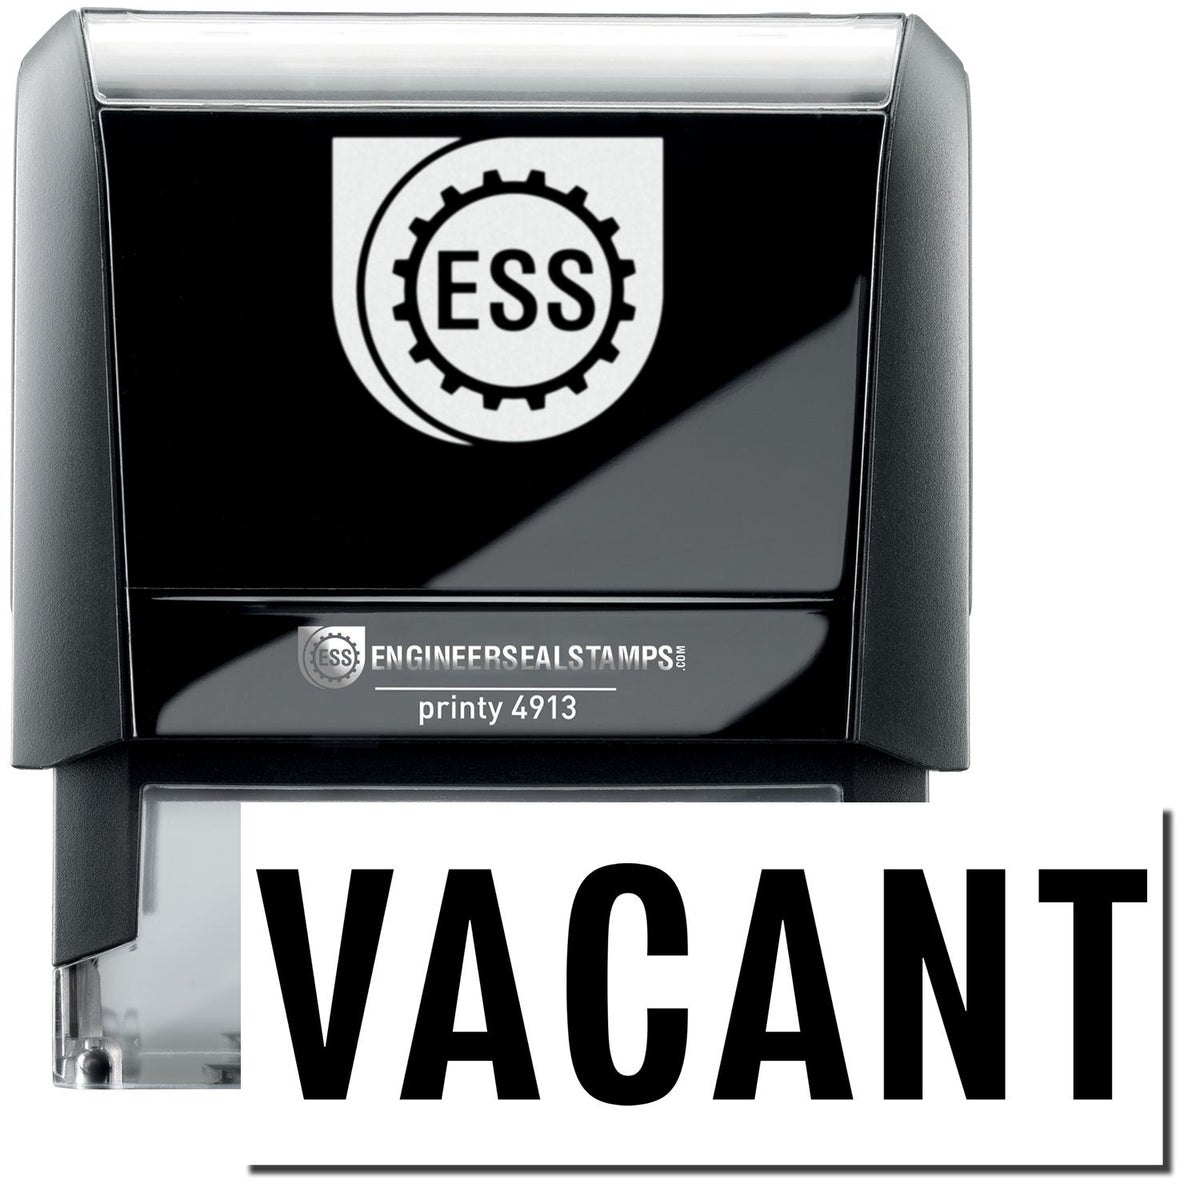 A self-inking stamp with a stamped image showing how the text &quot;VACANT&quot; in a large font is displayed by it after stamping.